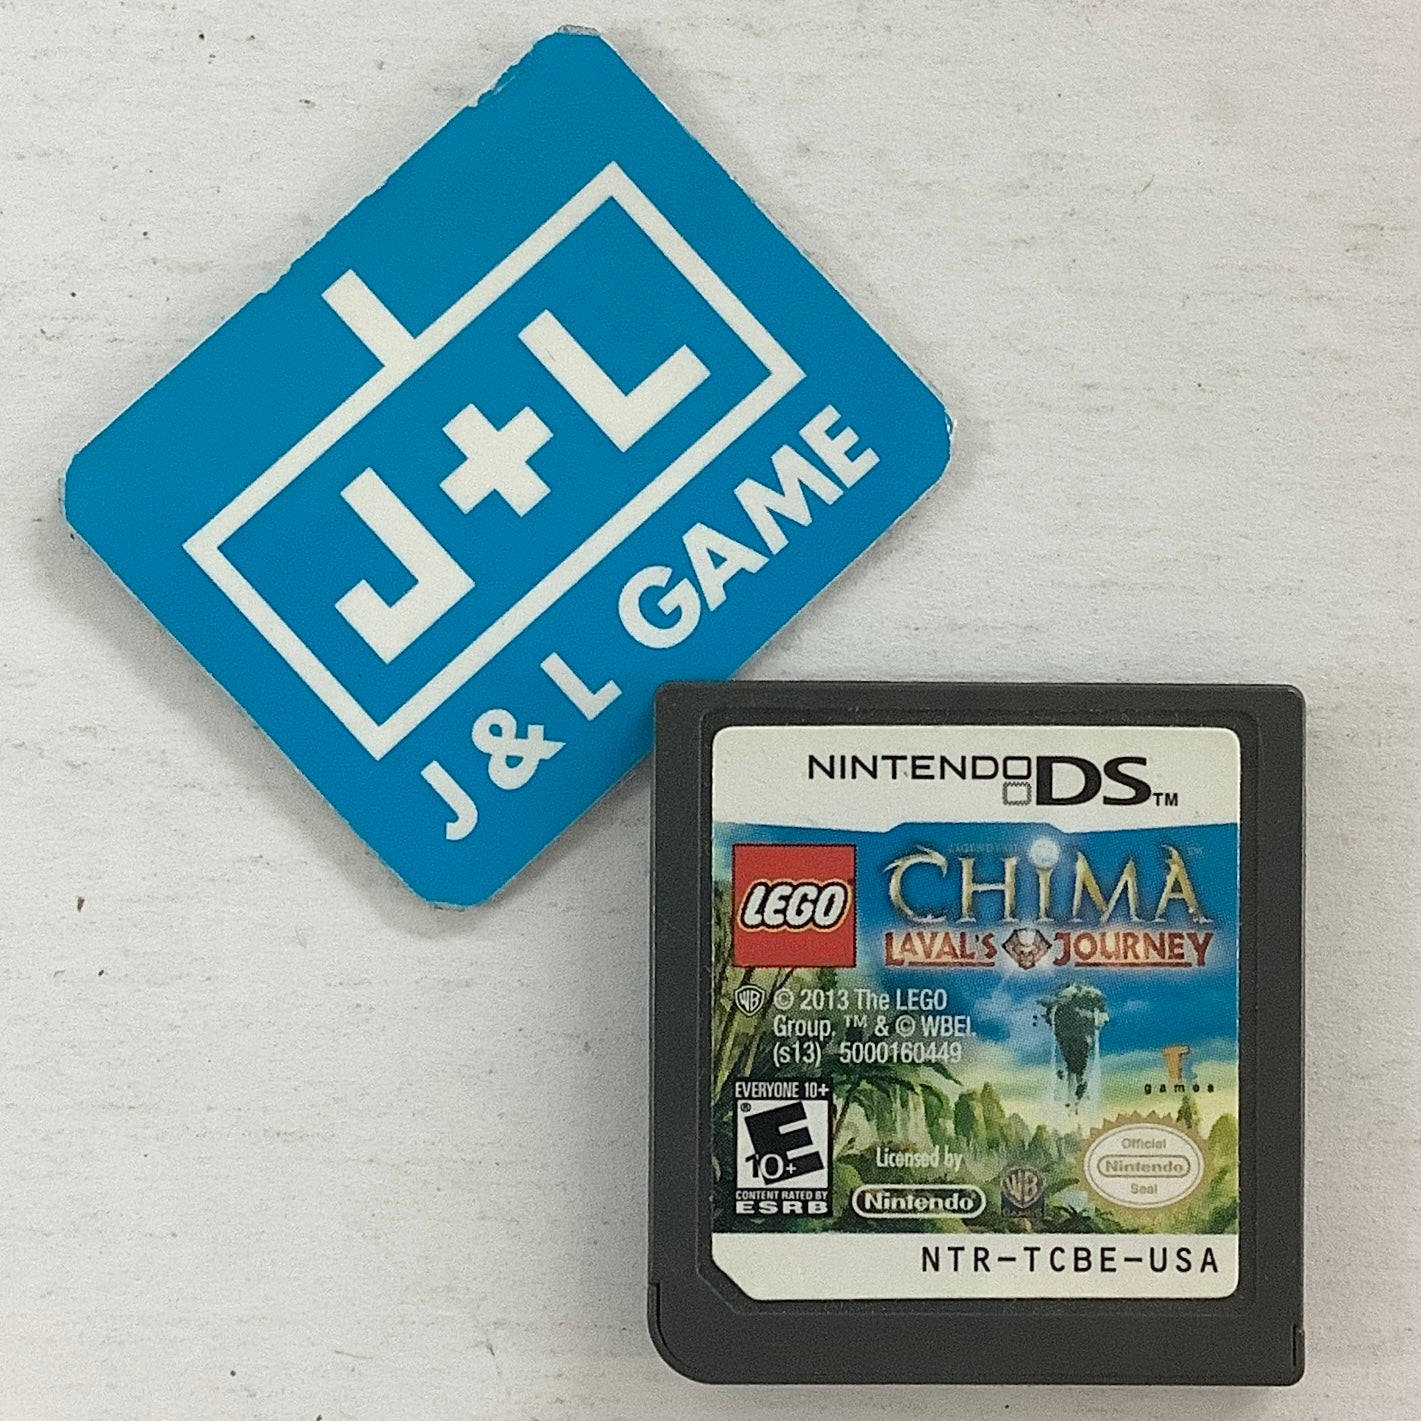 LEGO Legends of Chima: Laval's Journey - (NDS) Nintendo DS [Pre-Owned]